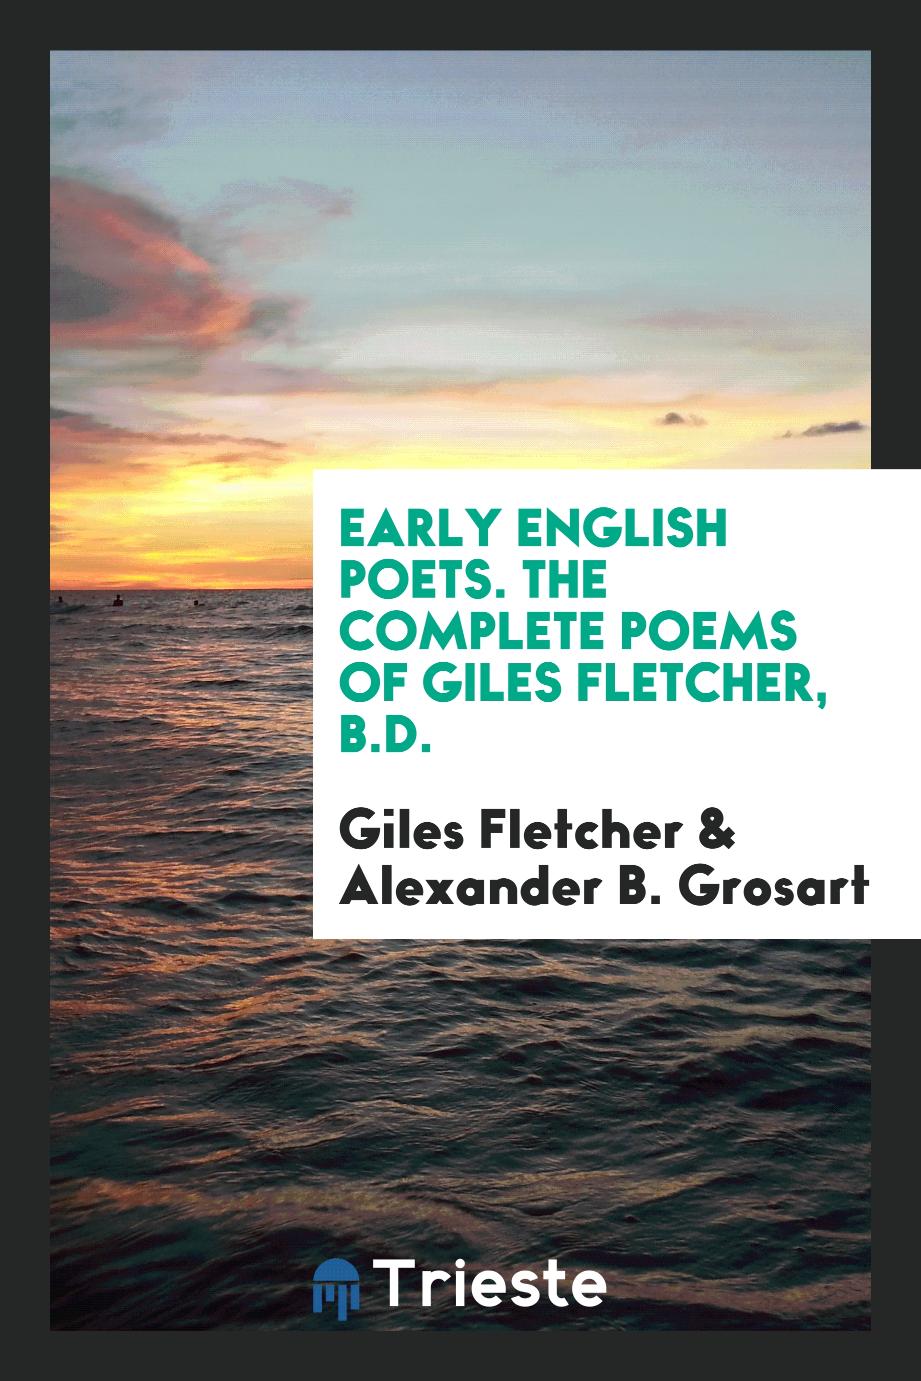 Early english poets. The complete poems of Giles Fletcher, B.D.